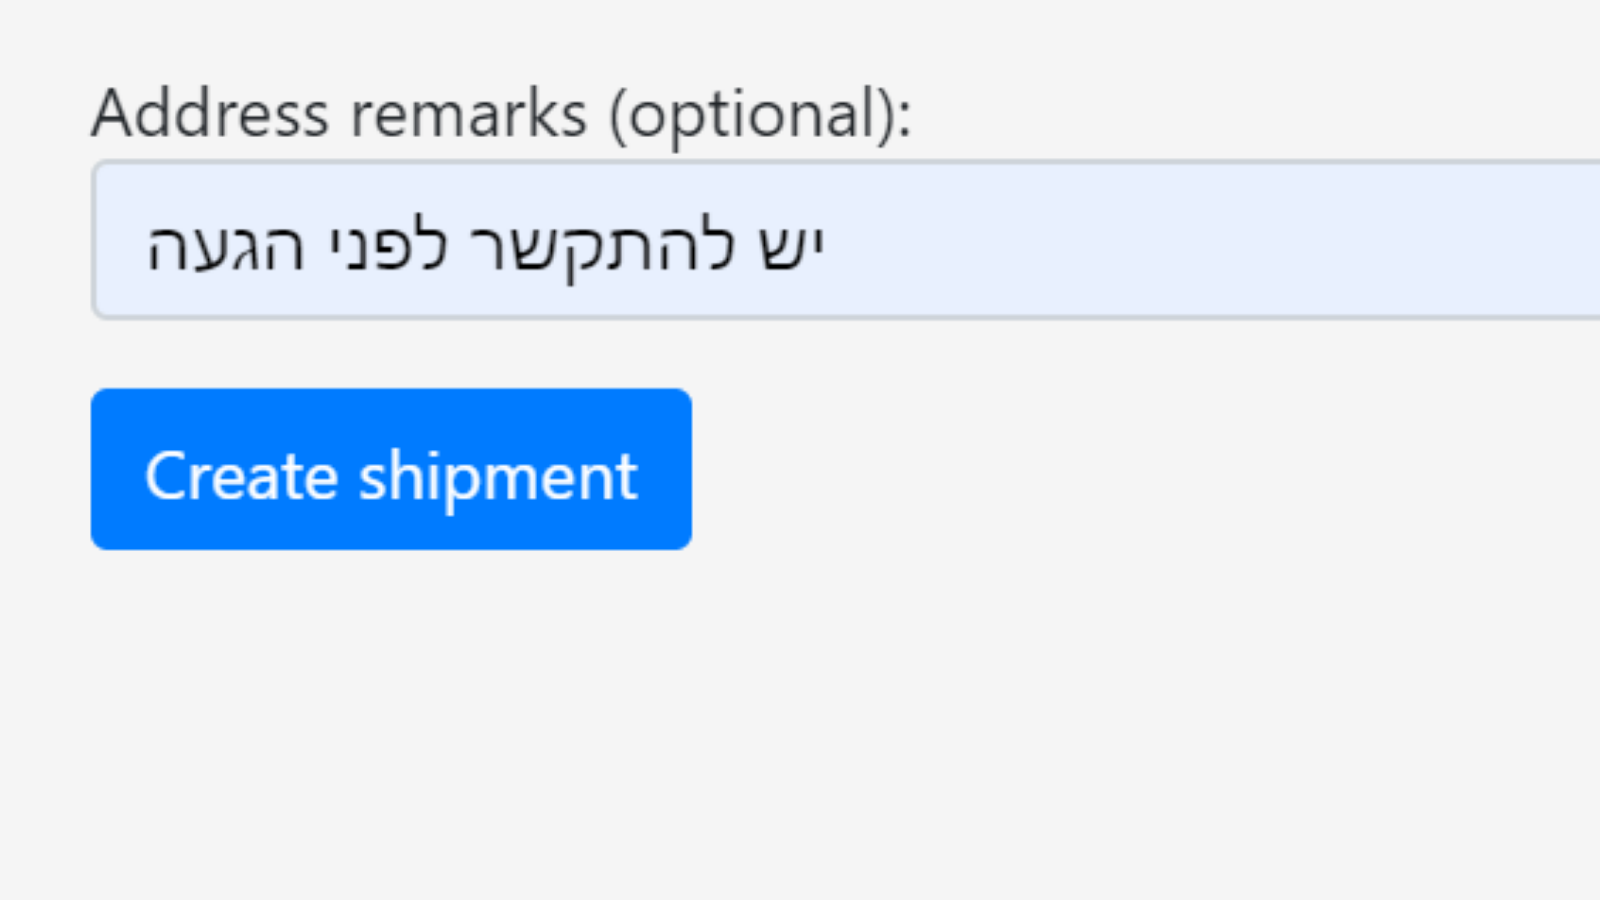 Add remarks for shipments